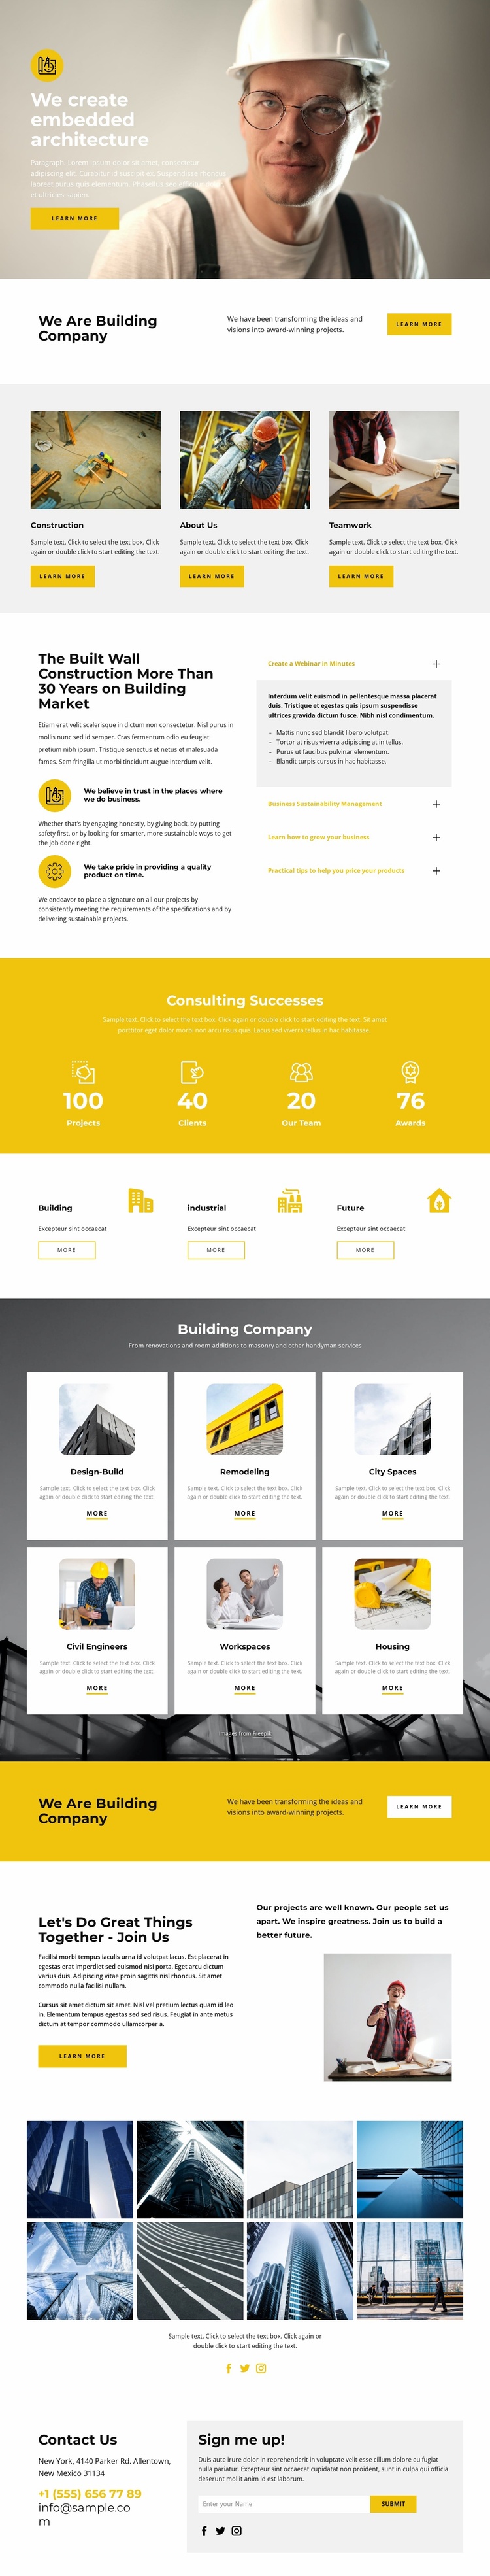 Let's build a turnkey Website Template